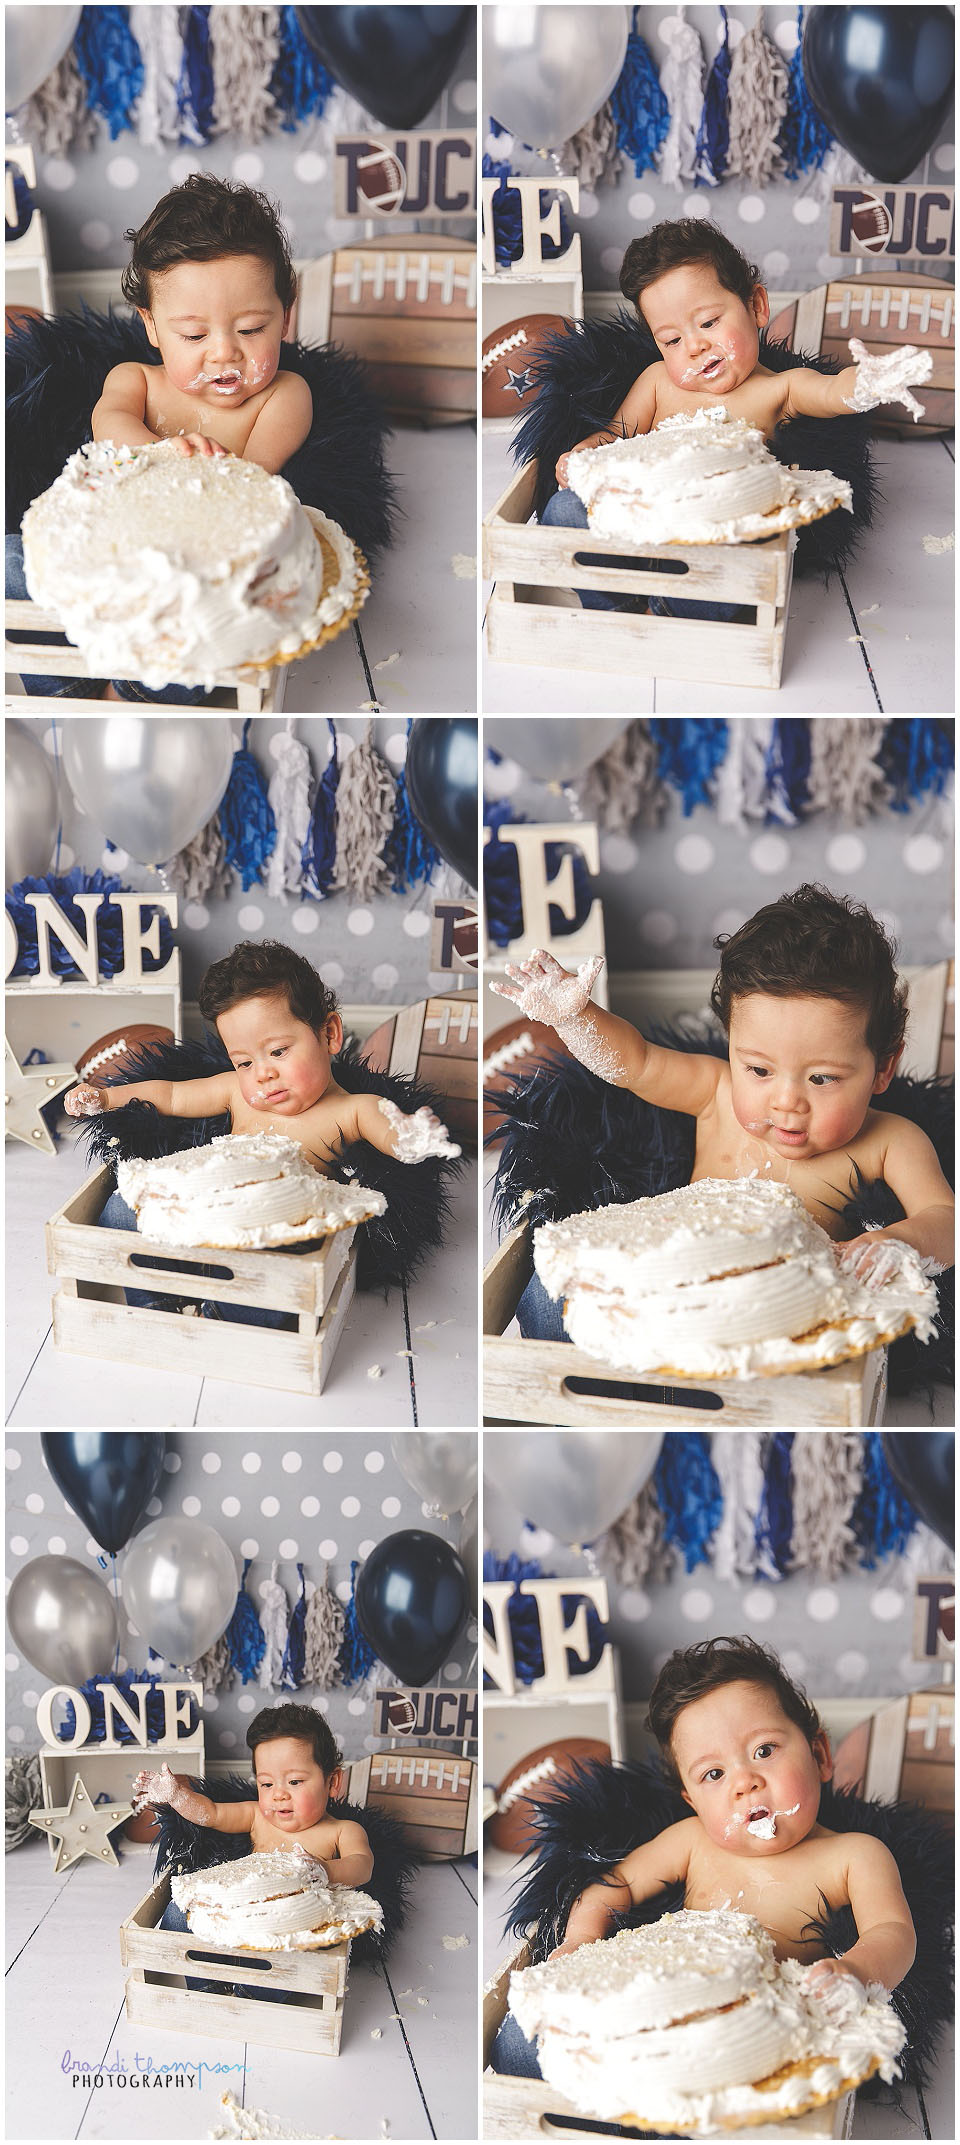 dallas cowboys football themed cake smash in plano, tx studio with one year old baby boy